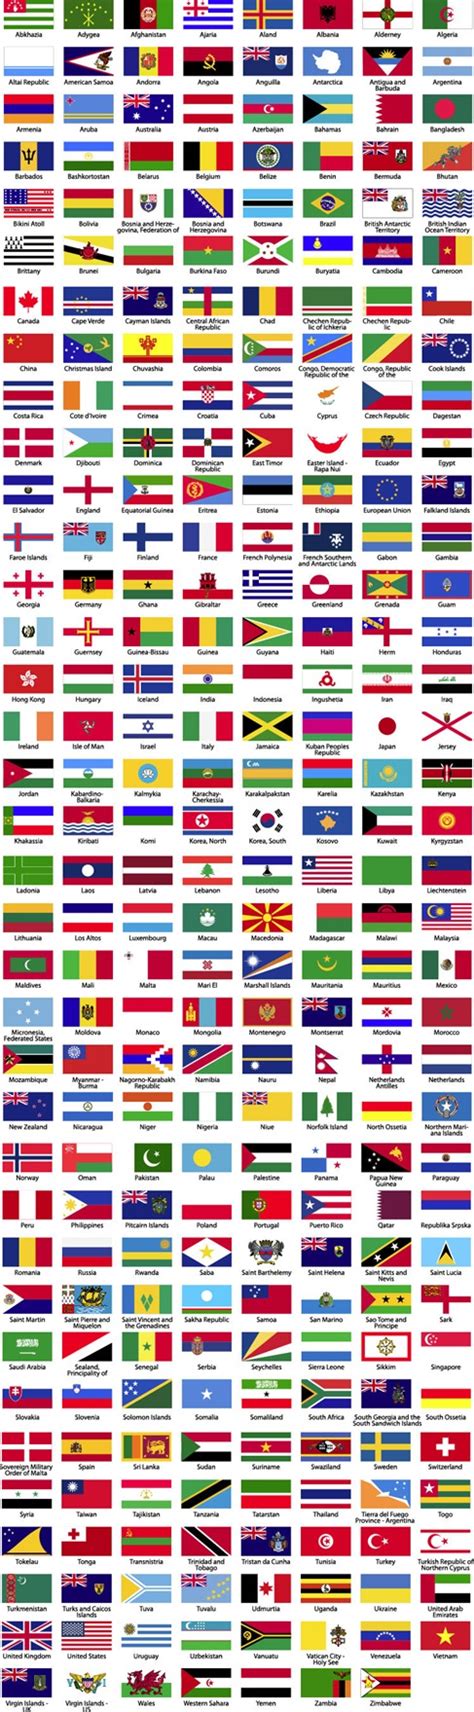 Alphabetical Order Flags Of The World With Names If You Try To Typ